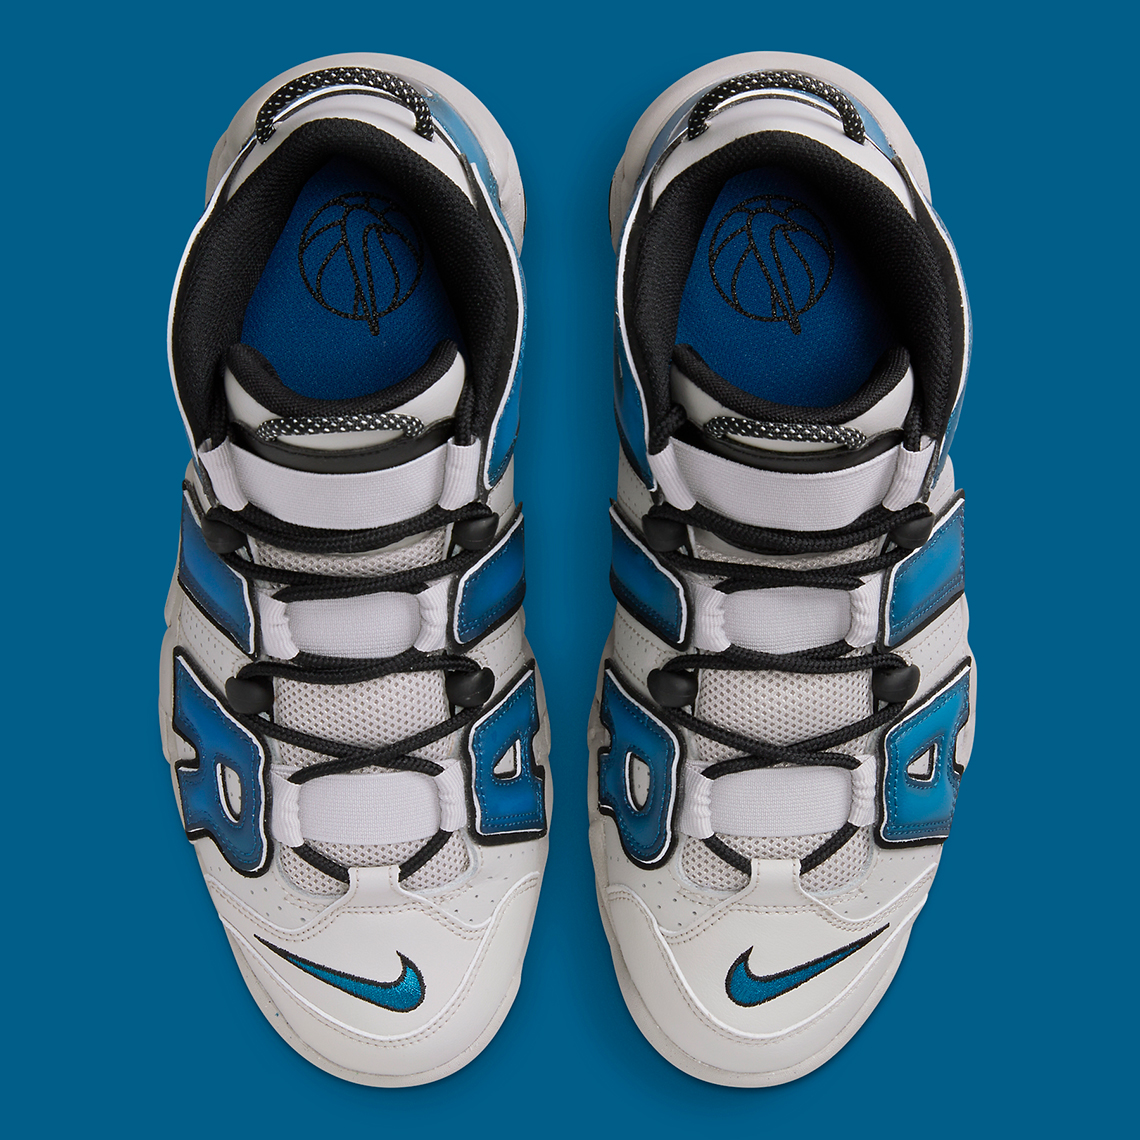 Nike Air More Uptempo Burnished Teal Fd5573 001 3